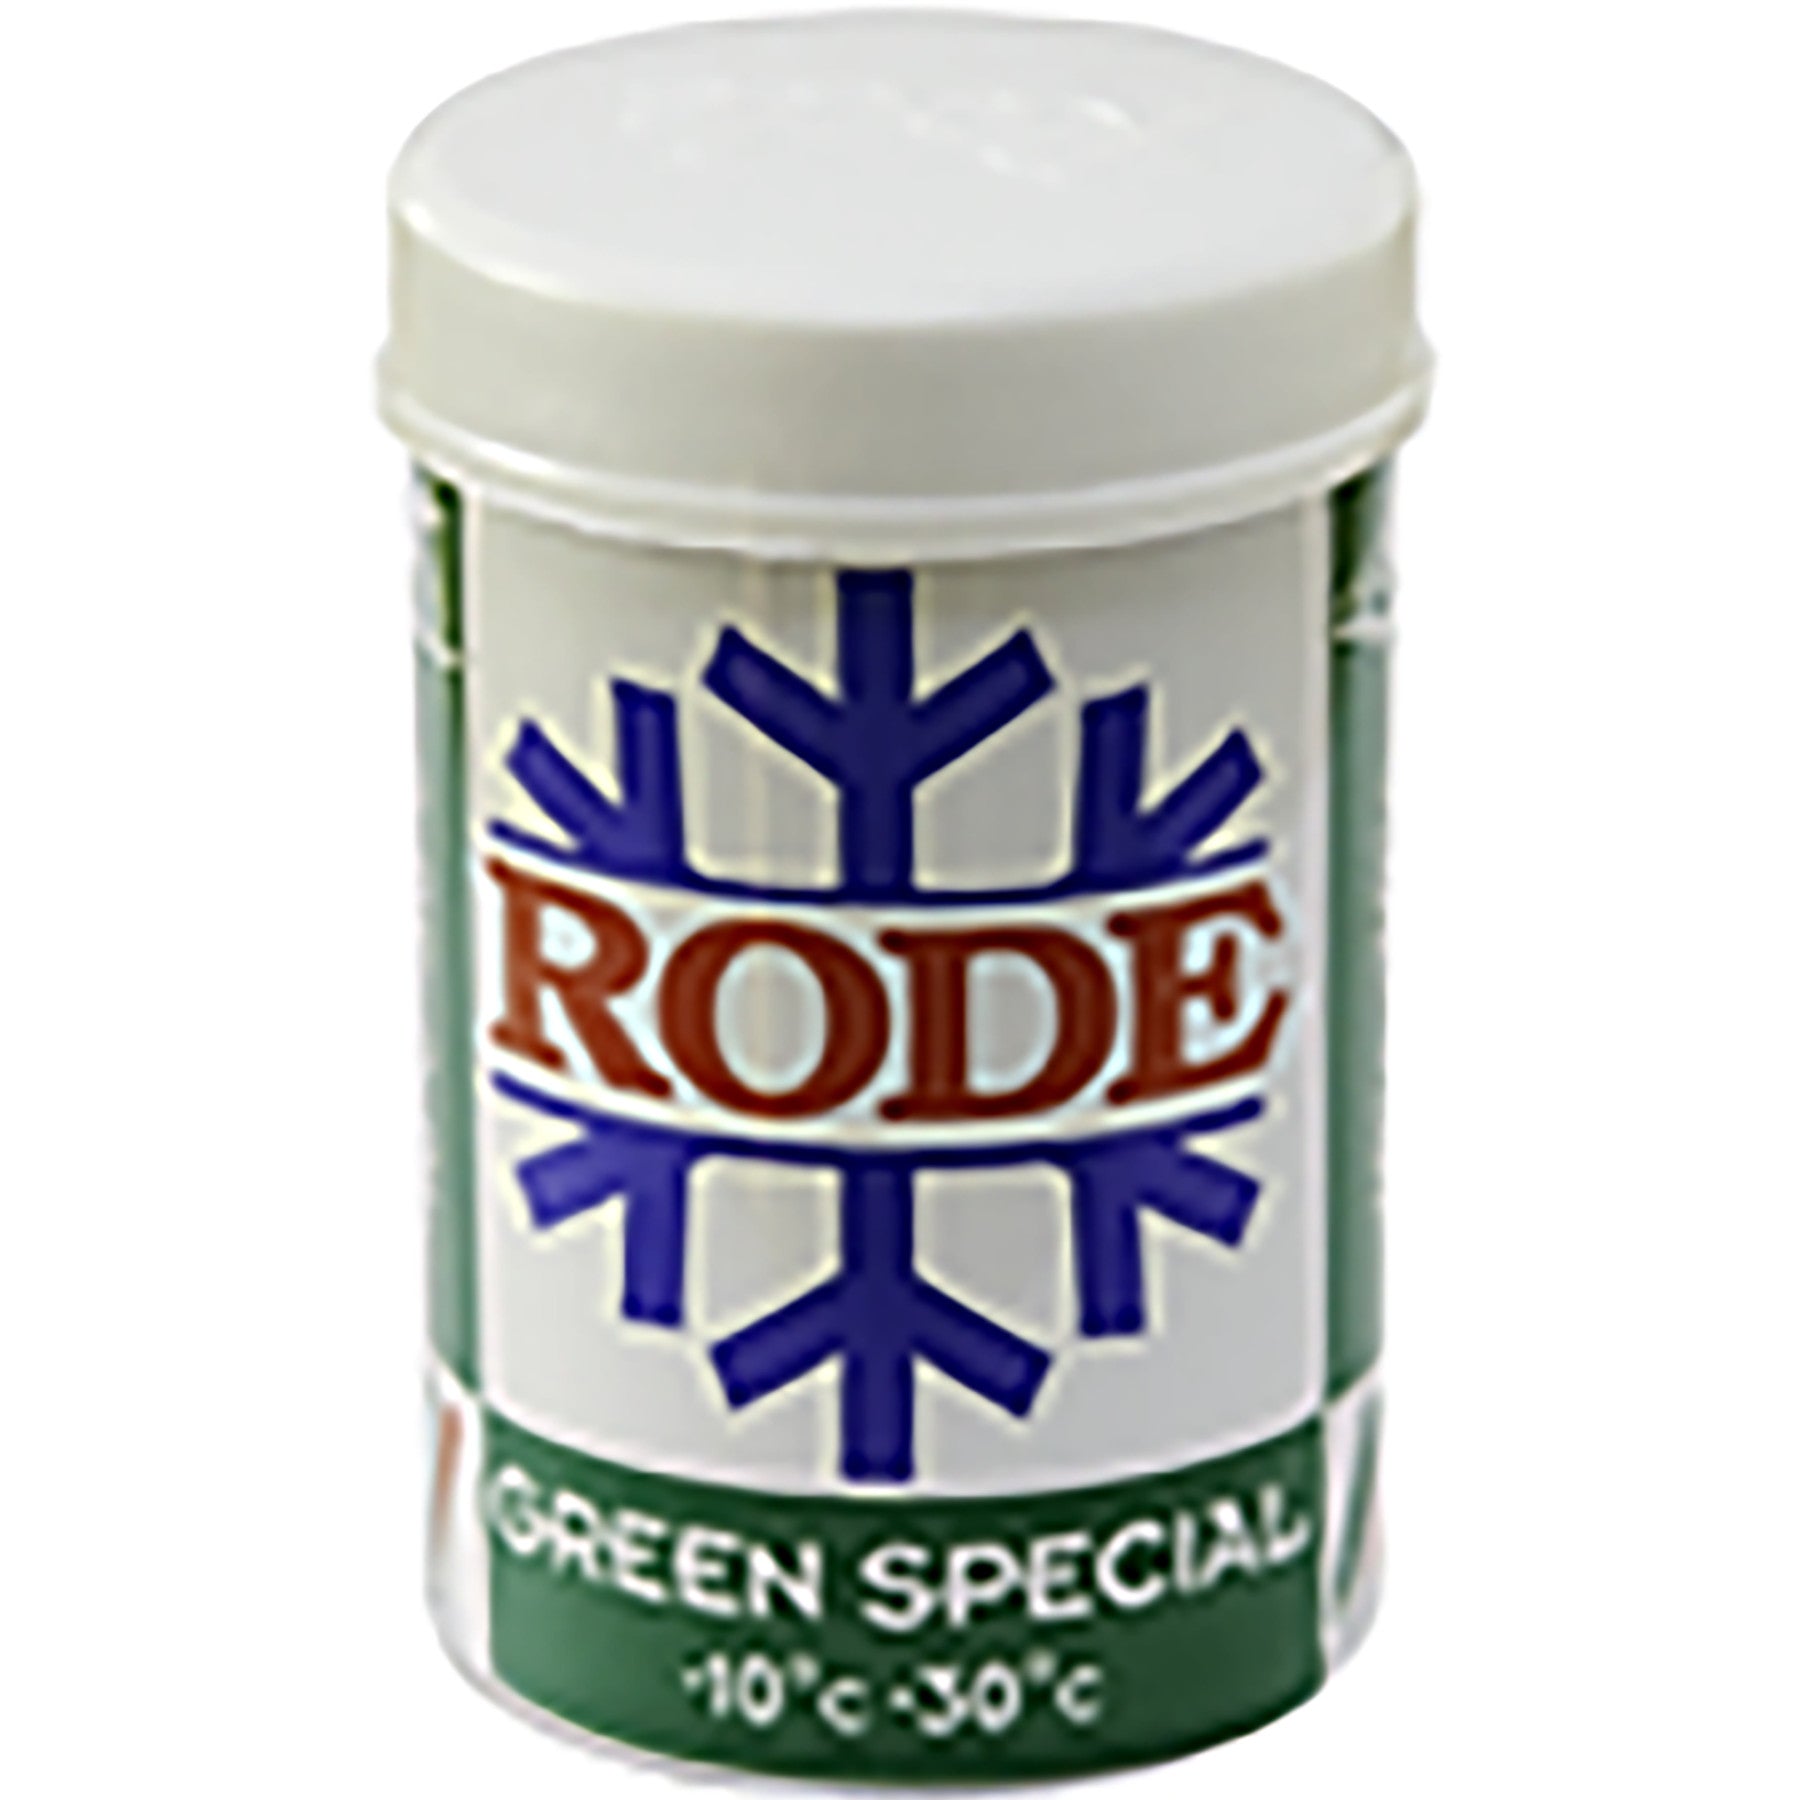 Buy green-special Rode Kick Basic